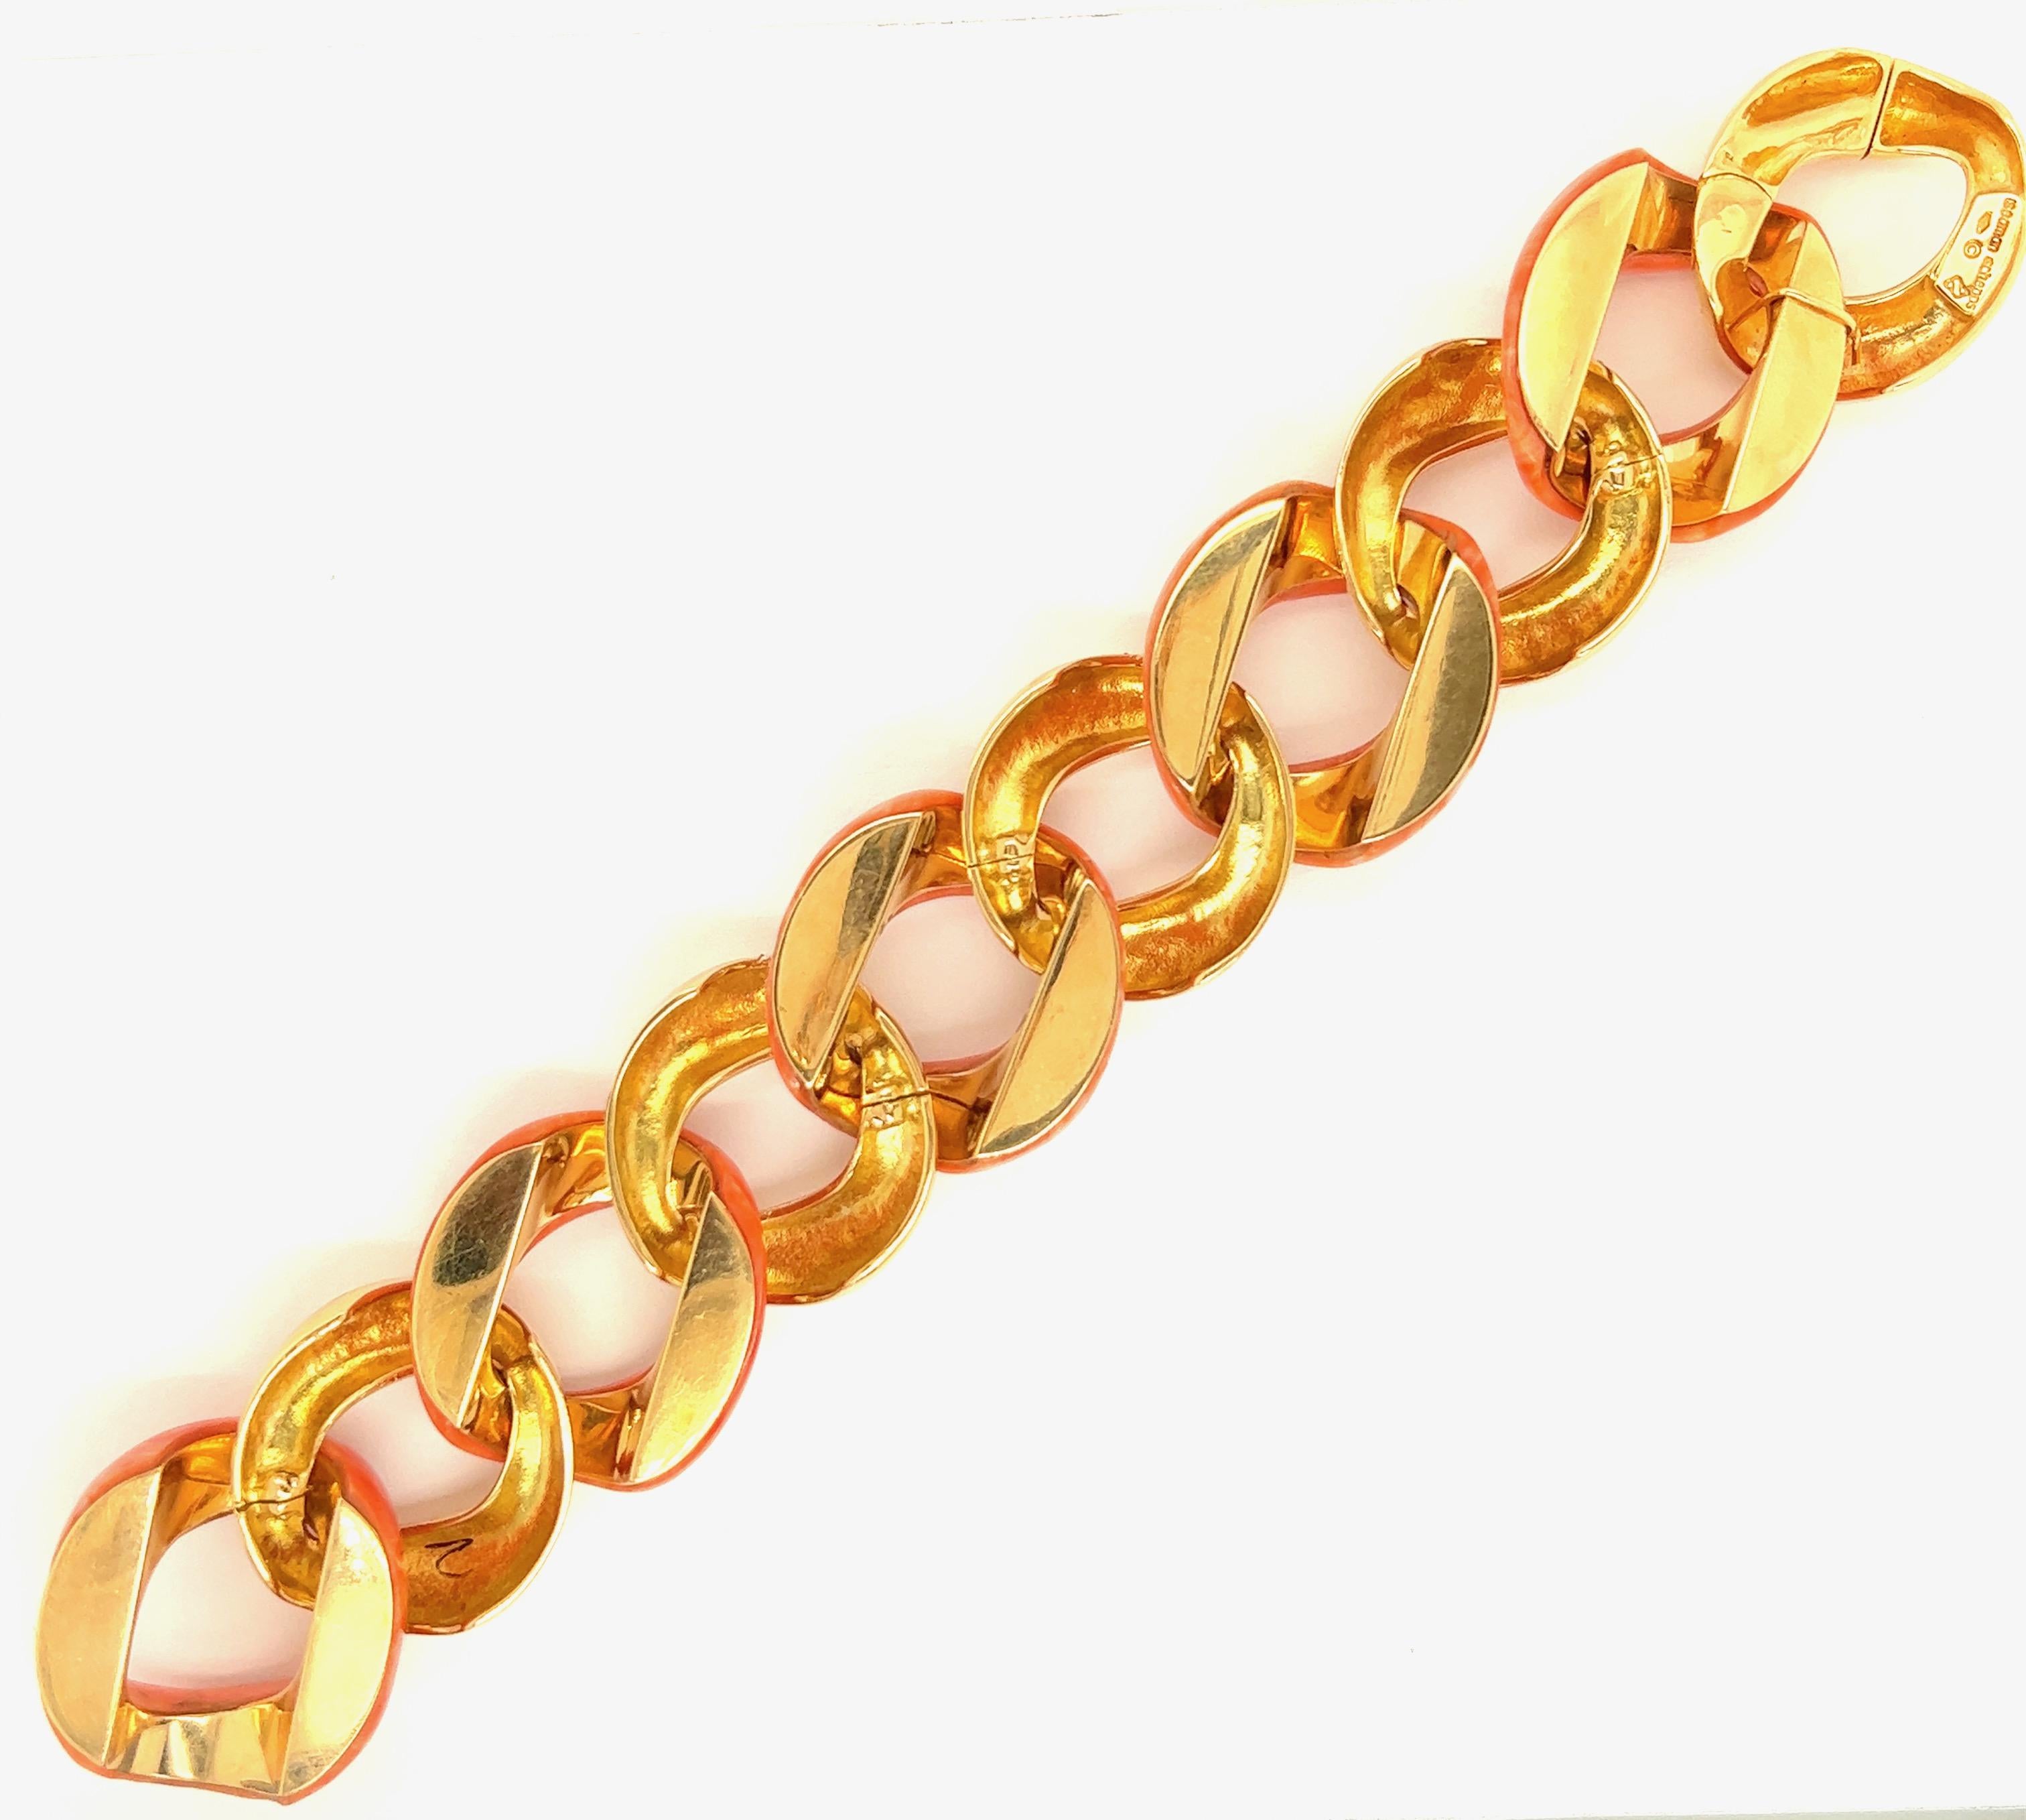 Seaman Schepps Coral 18k Yellow Gold Large Link Bracelet

Five beautiful coral links with white strikes featured on them, alternating with five 18 karat yellow gold links; marked Seaman Schepps, 750, shell hallmark

This is a limited edition Seaman